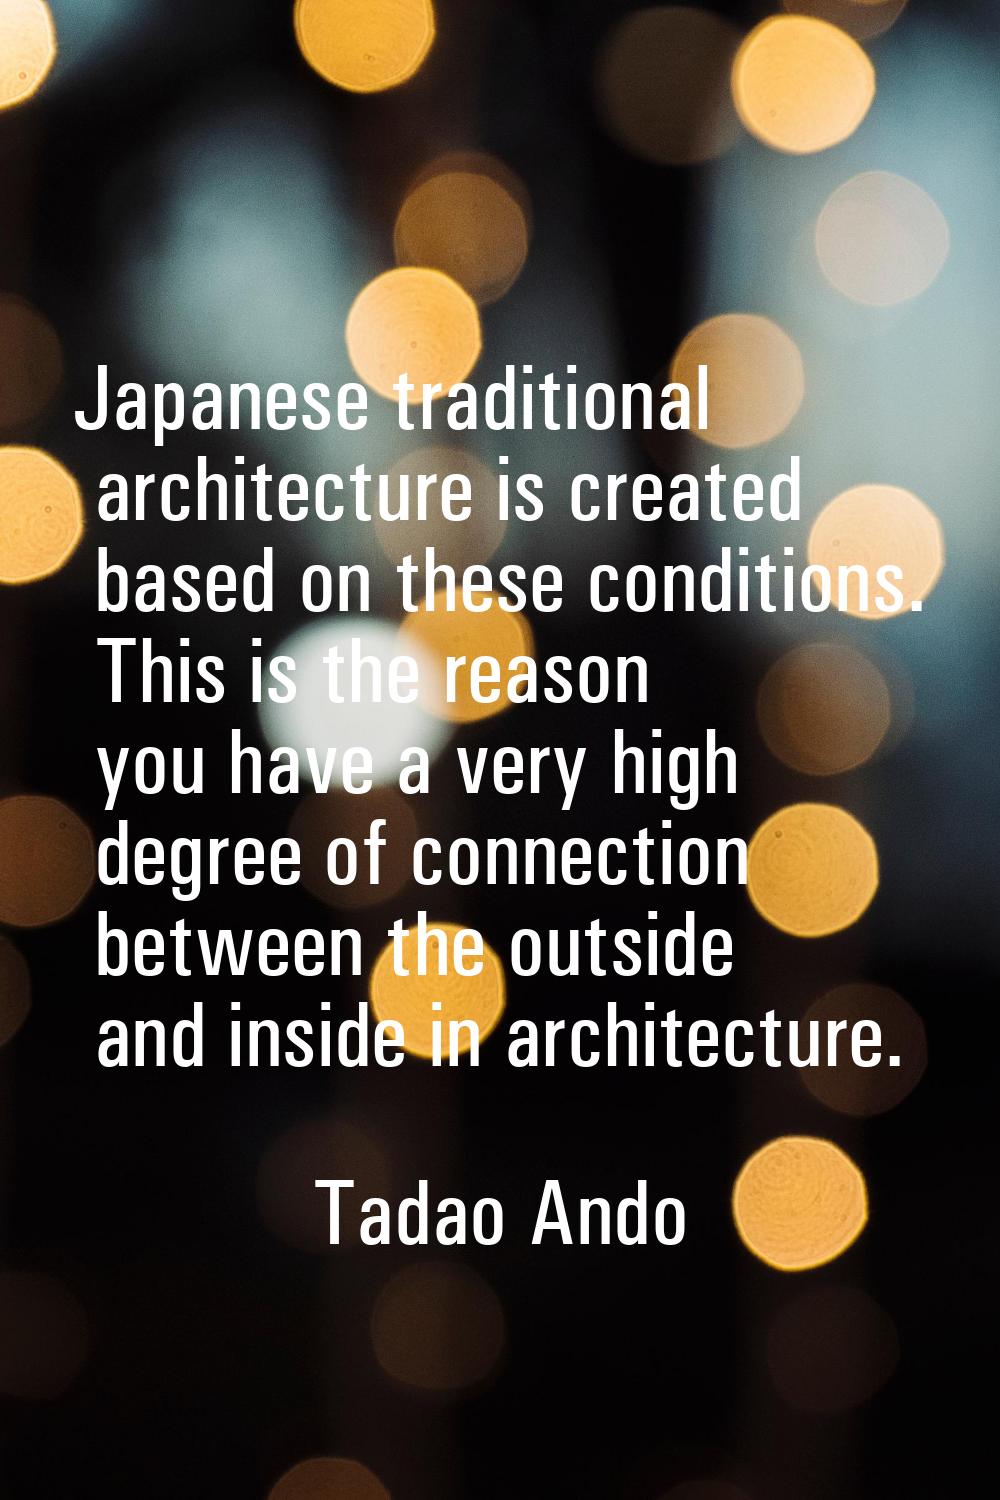 Japanese traditional architecture is created based on these conditions. This is the reason you have